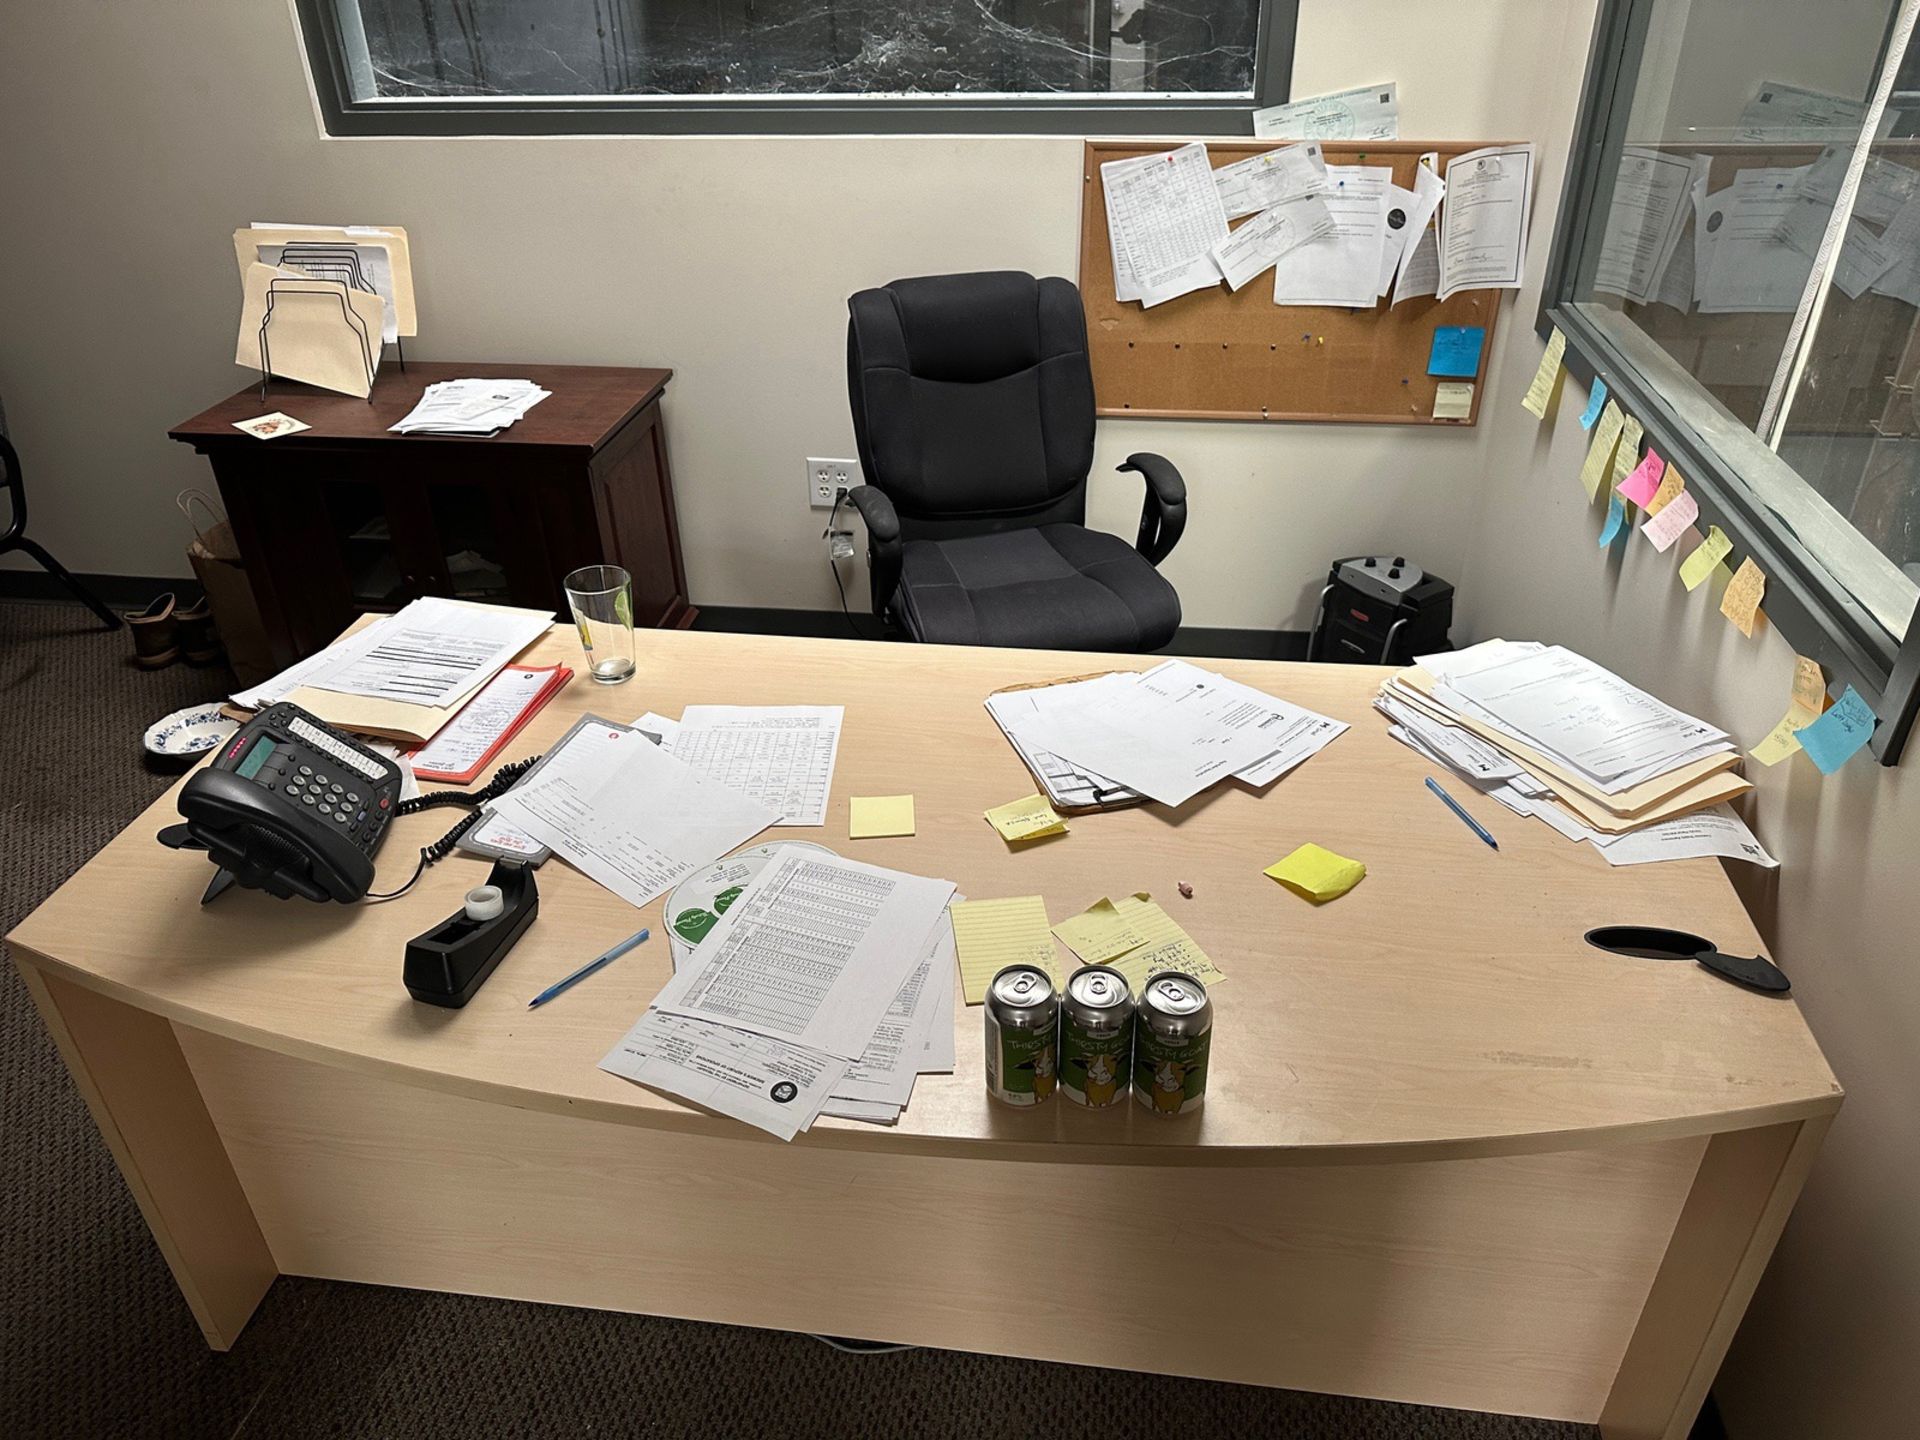 Lot of Contents of Office - 3' x 6' Desk - File Cabinet 21" x 3' - 42" Diameter Tab | Rig Fee $225